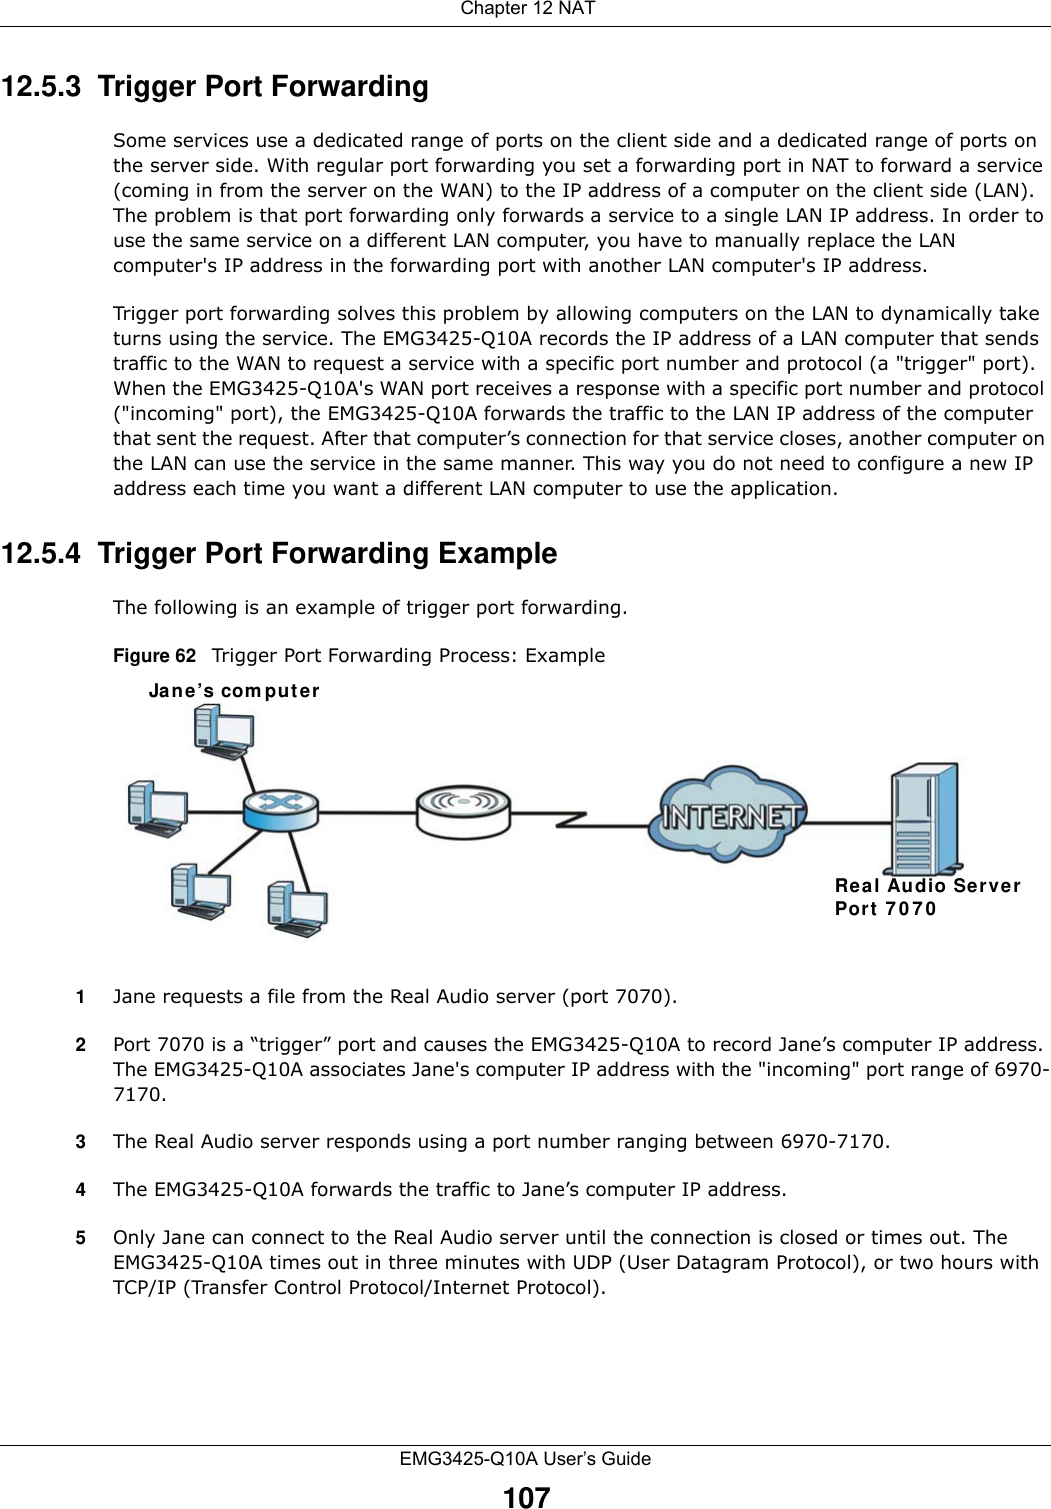  Chapter 12 NATEMG3425-Q10A User’s Guide10712.5.3  Trigger Port Forwarding Some services use a dedicated range of ports on the client side and a dedicated range of ports on the server side. With regular port forwarding you set a forwarding port in NAT to forward a service (coming in from the server on the WAN) to the IP address of a computer on the client side (LAN). The problem is that port forwarding only forwards a service to a single LAN IP address. In order to use the same service on a different LAN computer, you have to manually replace the LAN computer&apos;s IP address in the forwarding port with another LAN computer&apos;s IP address. Trigger port forwarding solves this problem by allowing computers on the LAN to dynamically take turns using the service. The EMG3425-Q10A records the IP address of a LAN computer that sends traffic to the WAN to request a service with a specific port number and protocol (a &quot;trigger&quot; port). When the EMG3425-Q10A&apos;s WAN port receives a response with a specific port number and protocol (&quot;incoming&quot; port), the EMG3425-Q10A forwards the traffic to the LAN IP address of the computer that sent the request. After that computer’s connection for that service closes, another computer on the LAN can use the service in the same manner. This way you do not need to configure a new IP address each time you want a different LAN computer to use the application.12.5.4  Trigger Port Forwarding Example The following is an example of trigger port forwarding.Figure 62   Trigger Port Forwarding Process: Example1Jane requests a file from the Real Audio server (port 7070).2Port 7070 is a “trigger” port and causes the EMG3425-Q10A to record Jane’s computer IP address. The EMG3425-Q10A associates Jane&apos;s computer IP address with the &quot;incoming&quot; port range of 6970-7170.3The Real Audio server responds using a port number ranging between 6970-7170.4The EMG3425-Q10A forwards the traffic to Jane’s computer IP address. 5Only Jane can connect to the Real Audio server until the connection is closed or times out. The EMG3425-Q10A times out in three minutes with UDP (User Datagram Protocol), or two hours with TCP/IP (Transfer Control Protocol/Internet Protocol). Jane’s com puterRea l Audio ServerPort 7 0 7 0